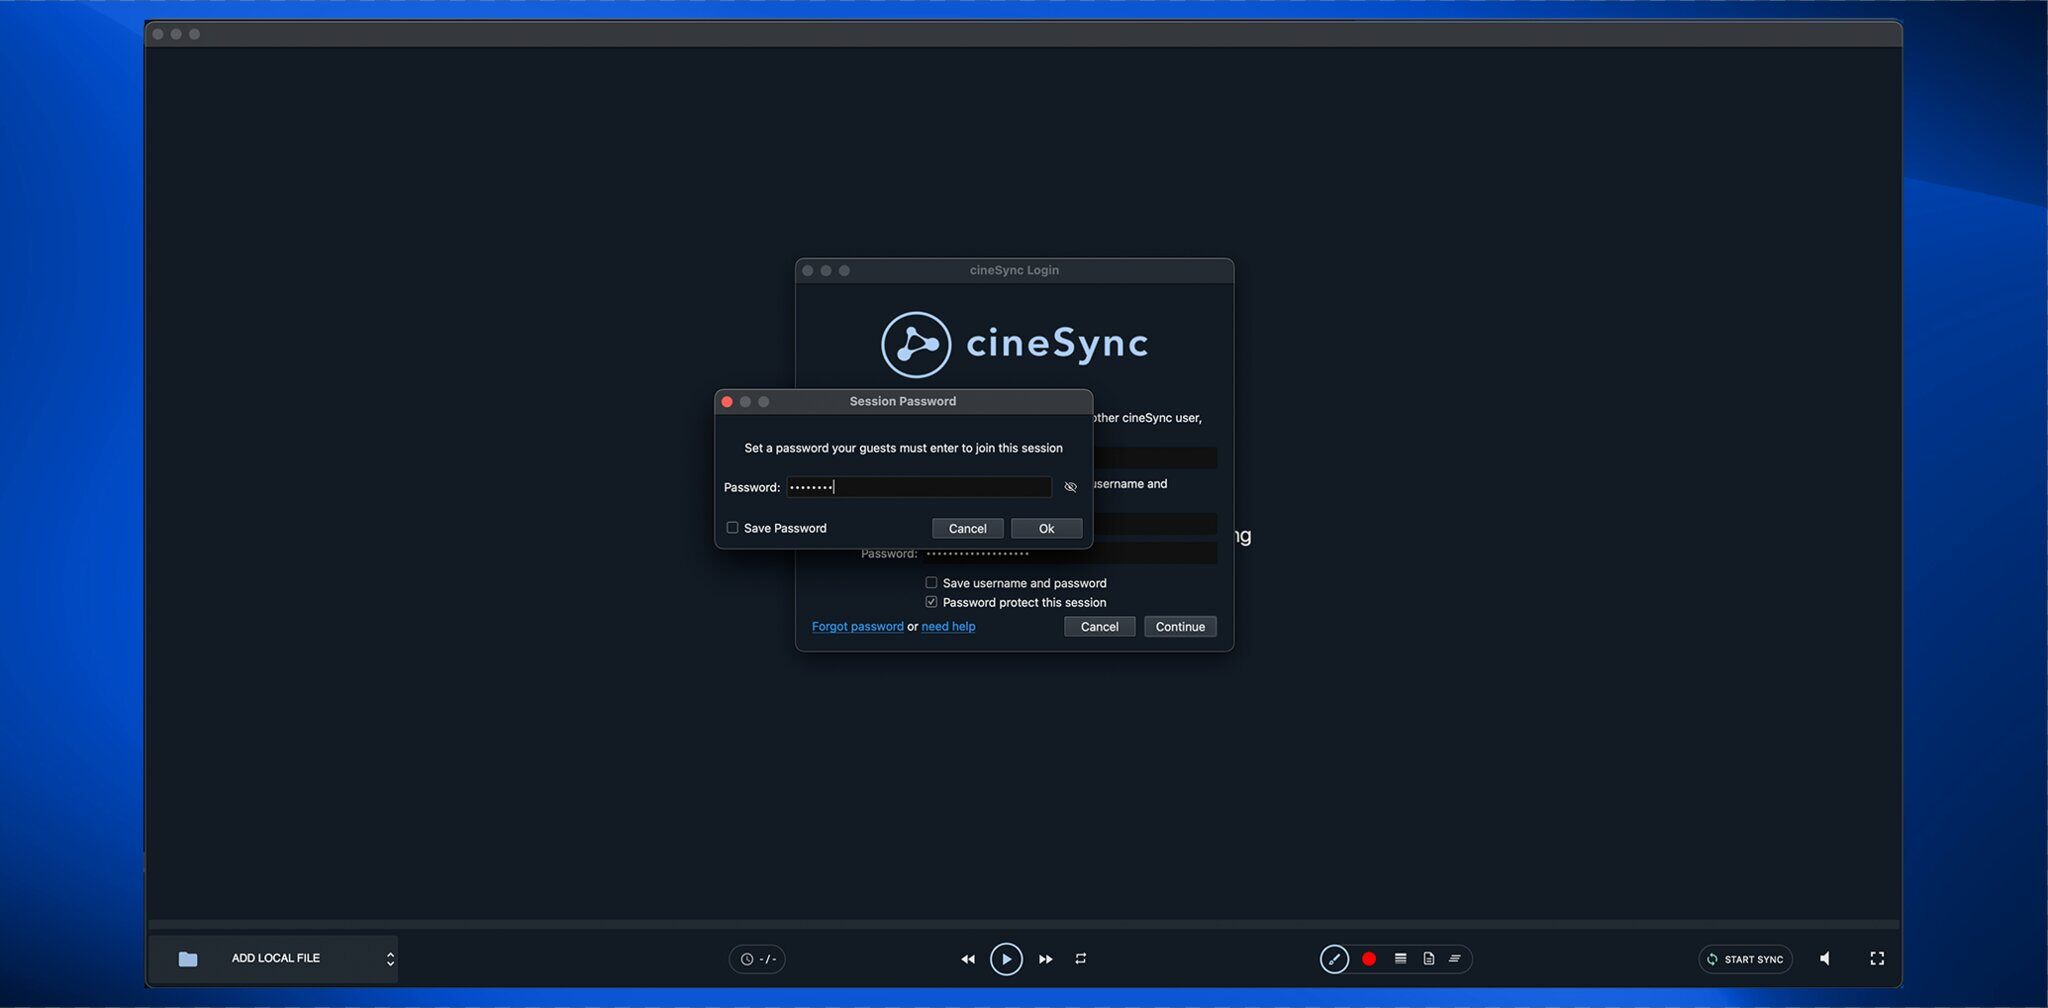 cinesync542 - Blog Feature Image - 13-lowres